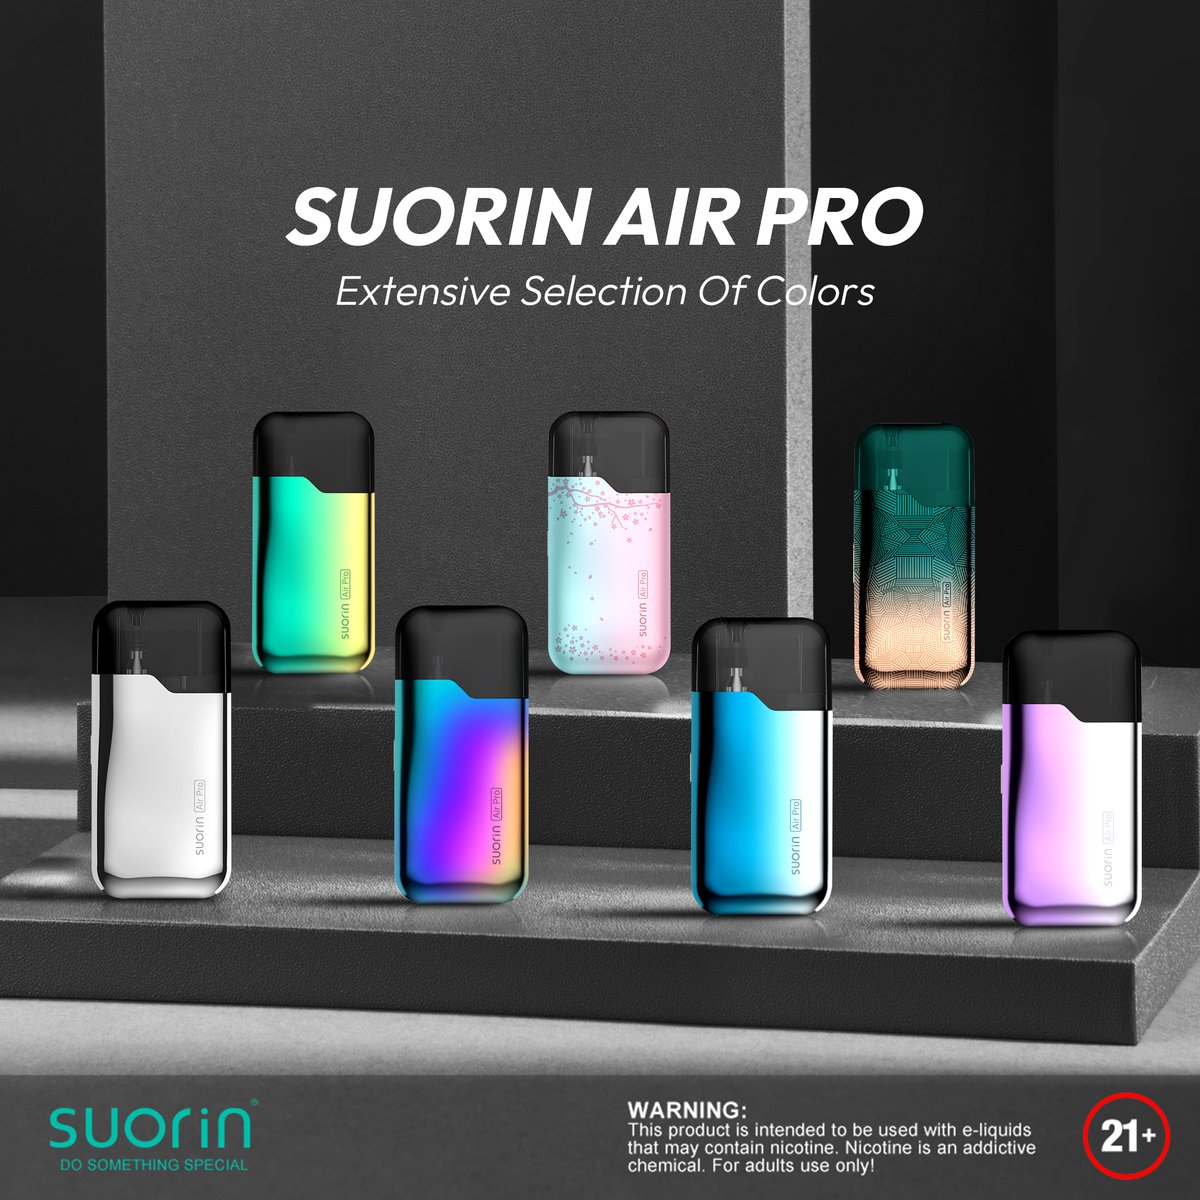 Suorin Air Pro has an extensive Selection Of Colors, Come and Choose one😉

Warnings: This product is only for adults.

#suorin #suorinairpro #pod #vape #vape4you #vaporholic #vaporciledug